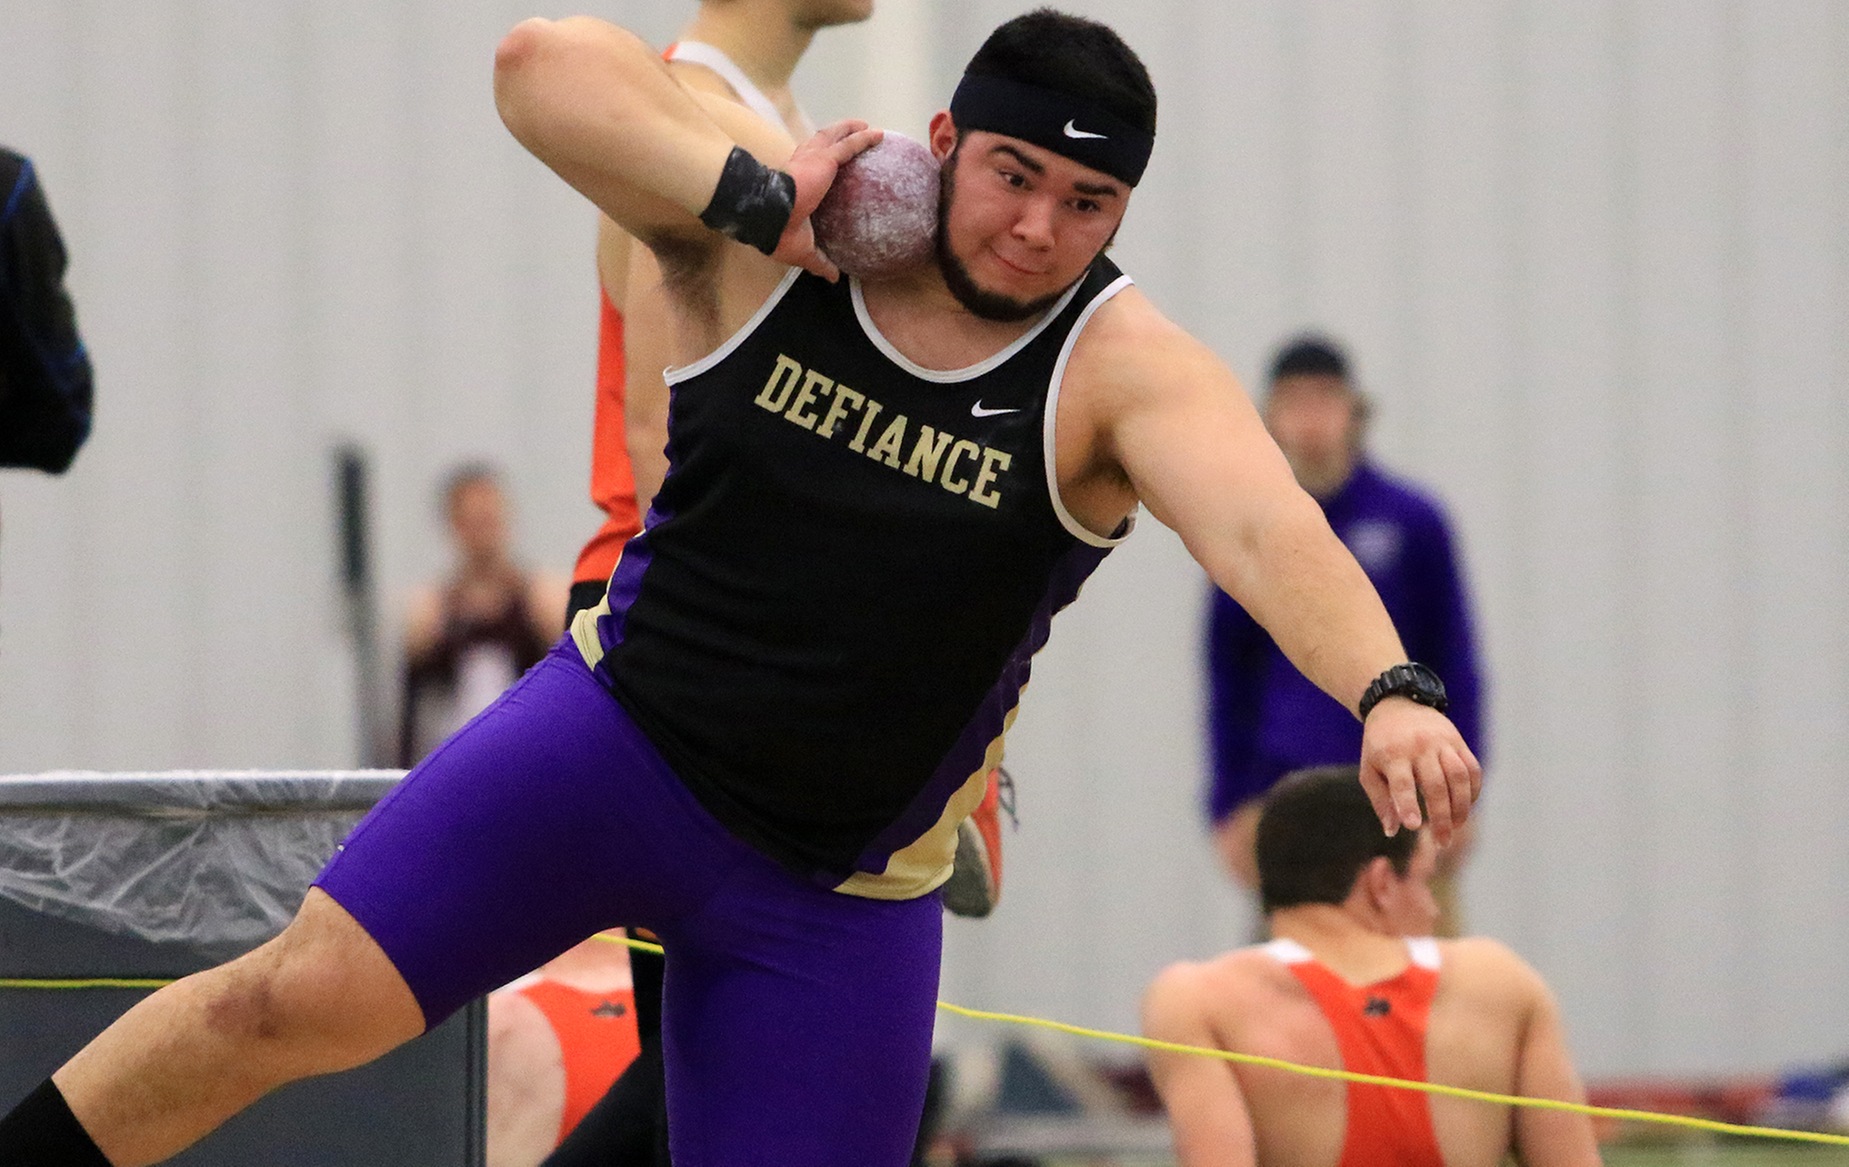 Castillo Takes Fourth in Shot Put at HCAC Championships